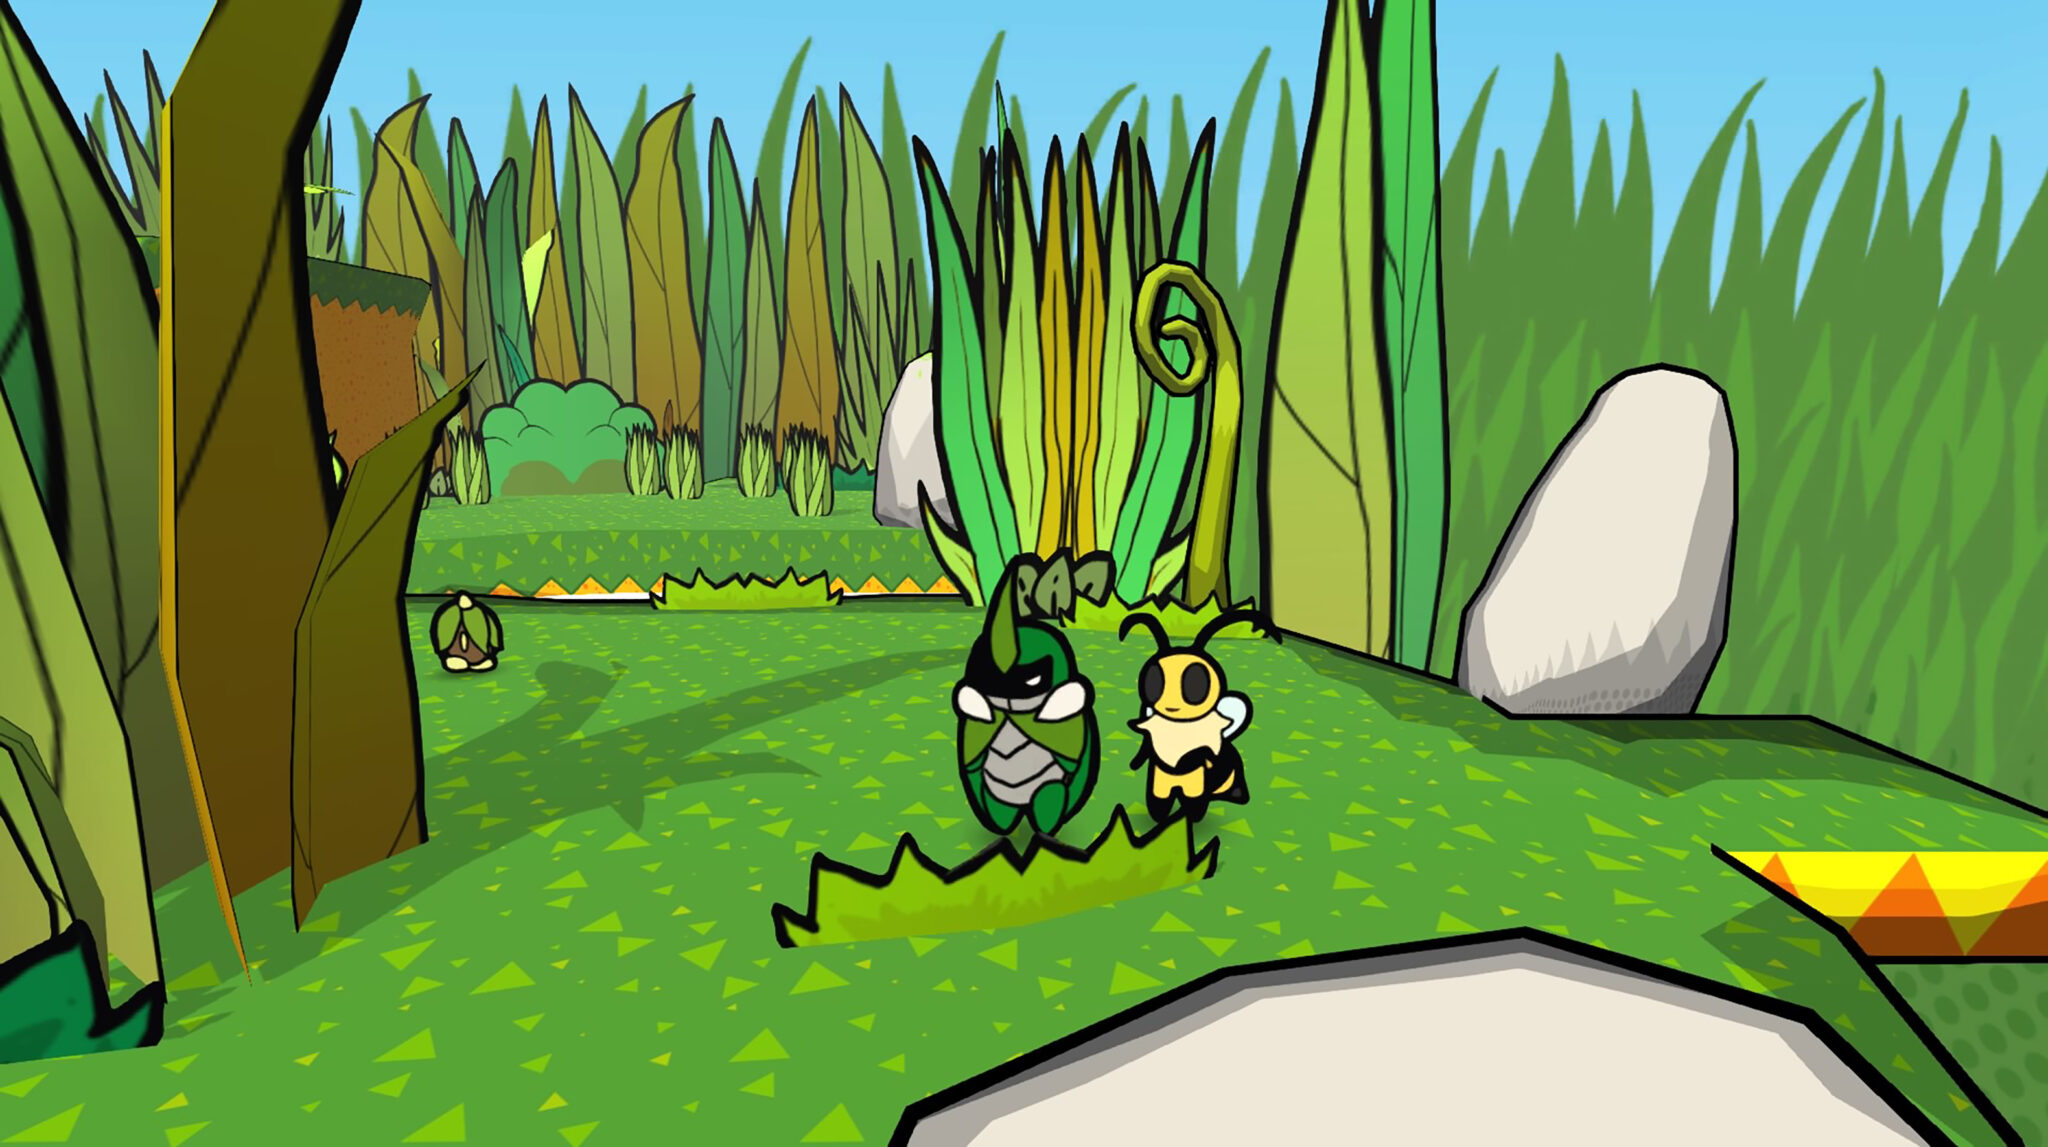 downloading Bug Fables -The Everlasting Sapling-